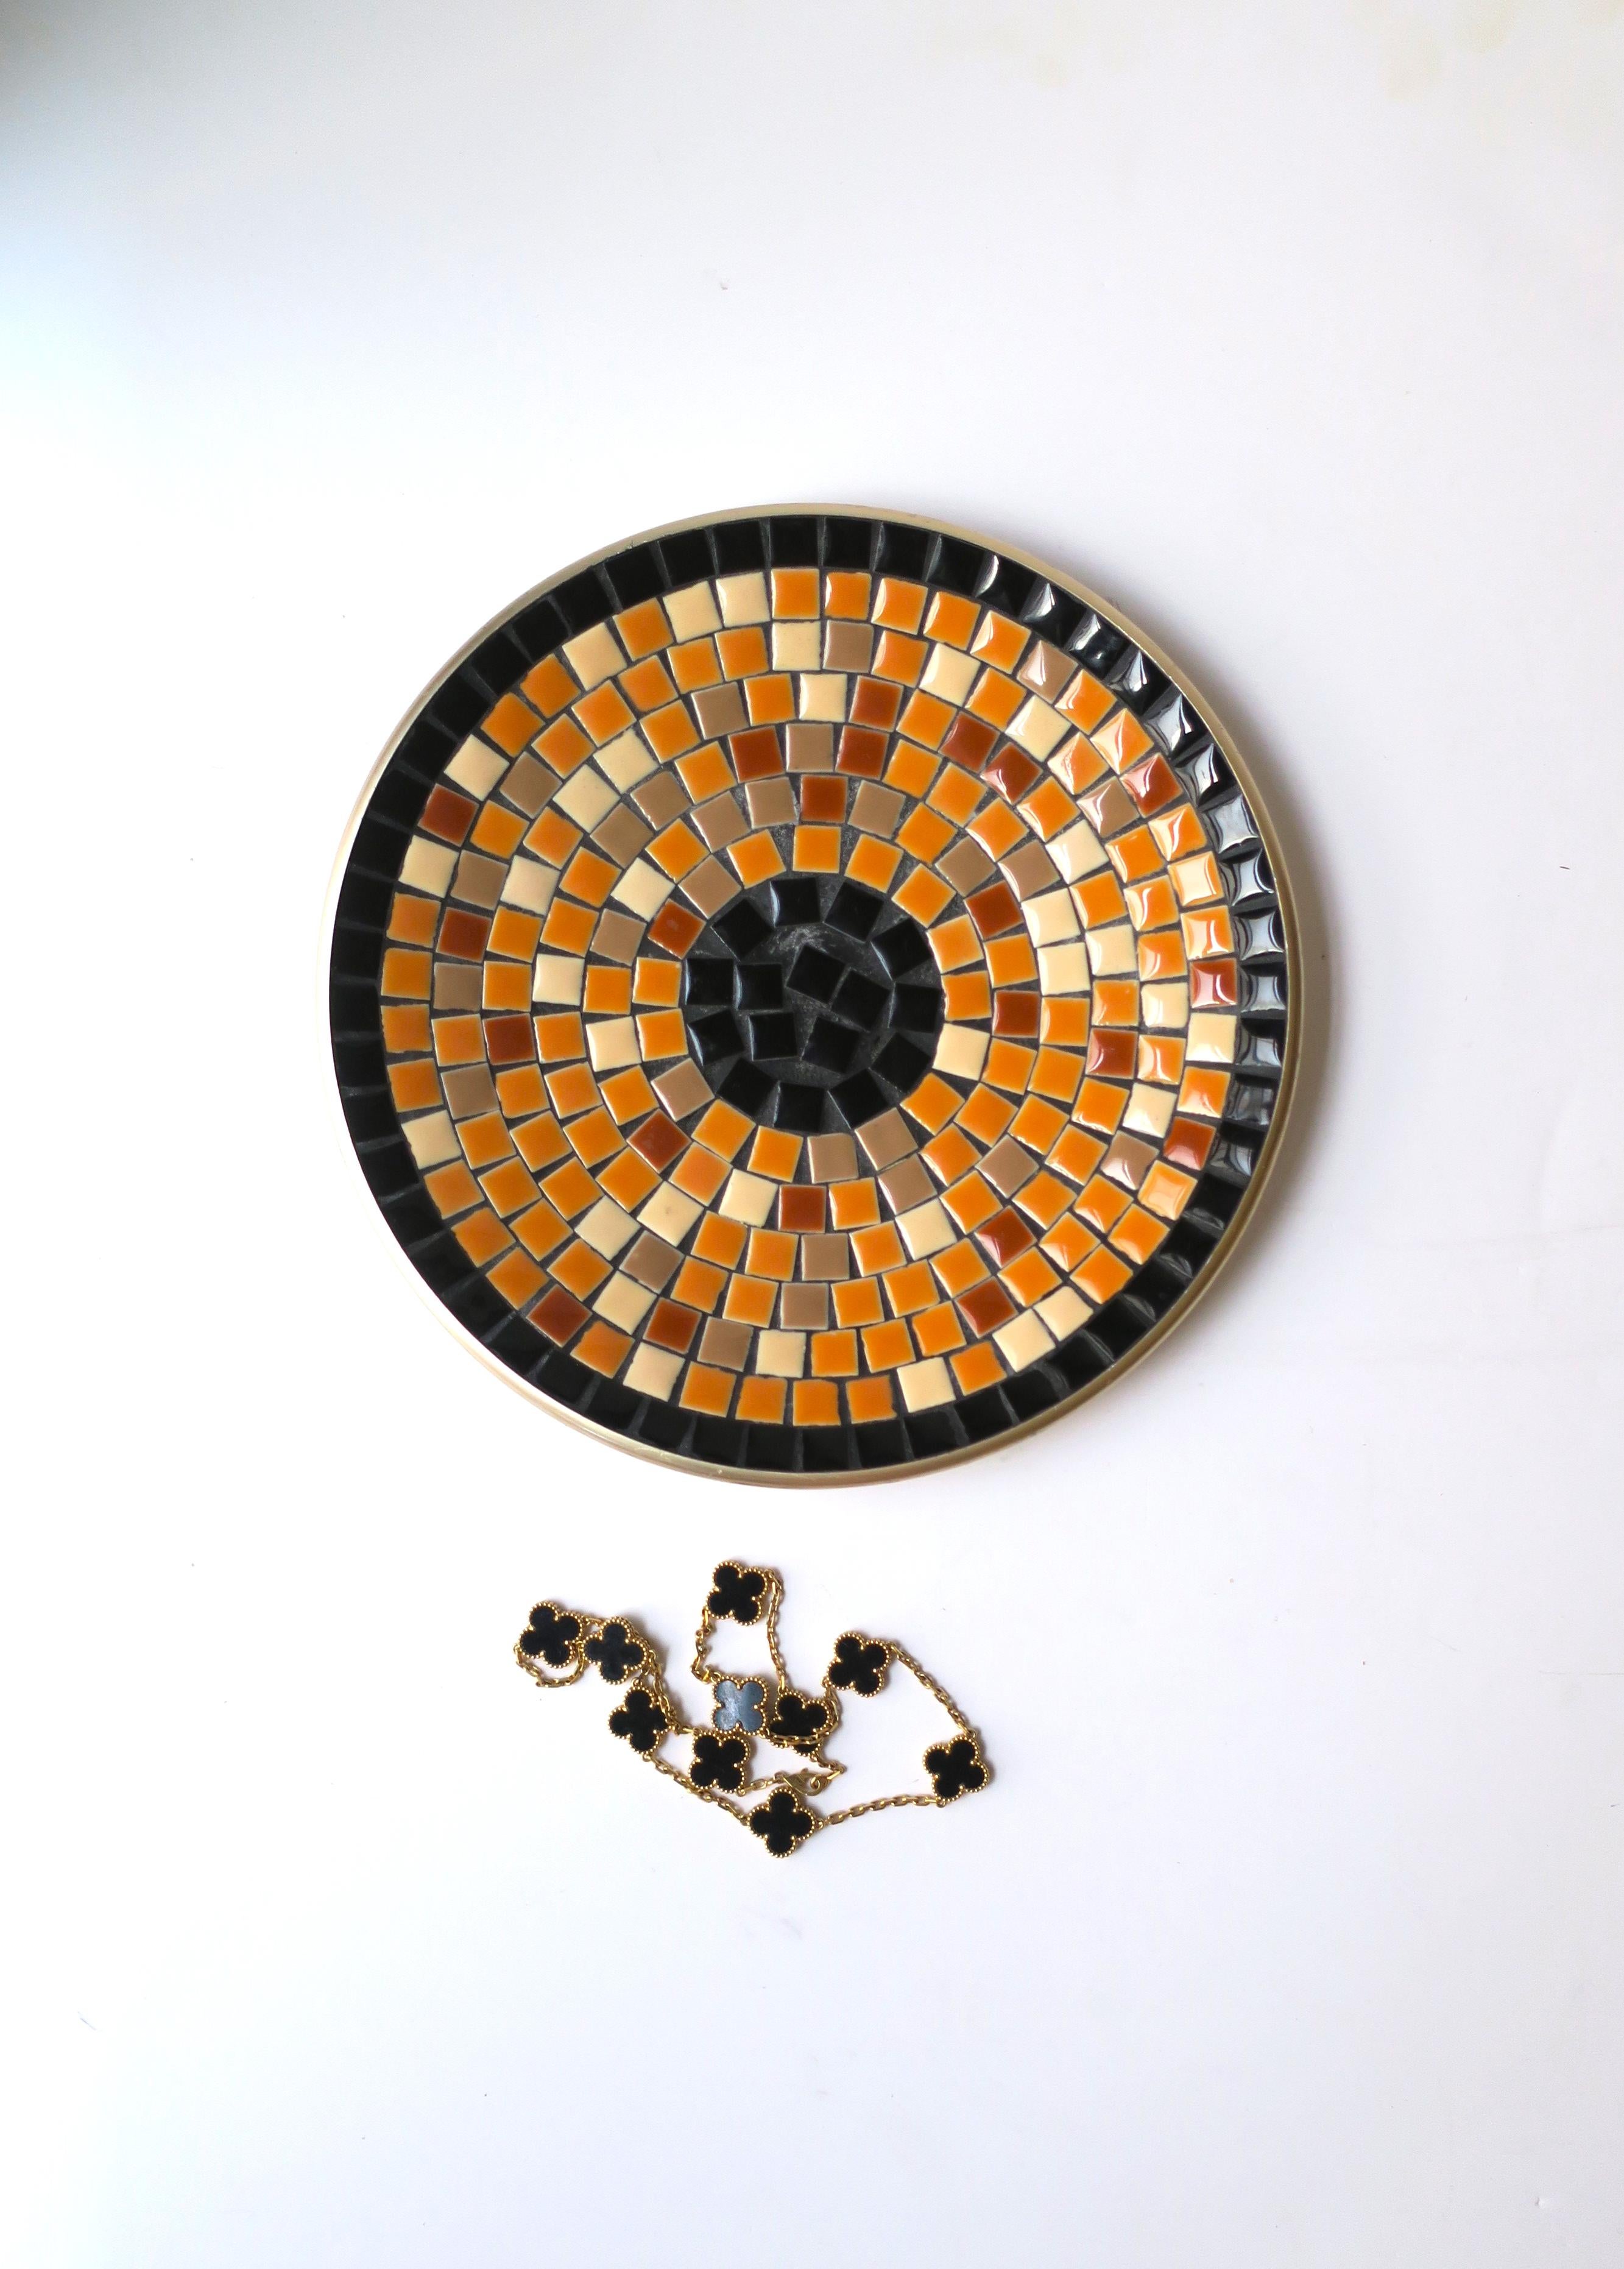 Mid-Century Modern Mosaic Ceramic Tile Dish Vide-Poche Catchall Black and Terracotta, circa 1960s For Sale